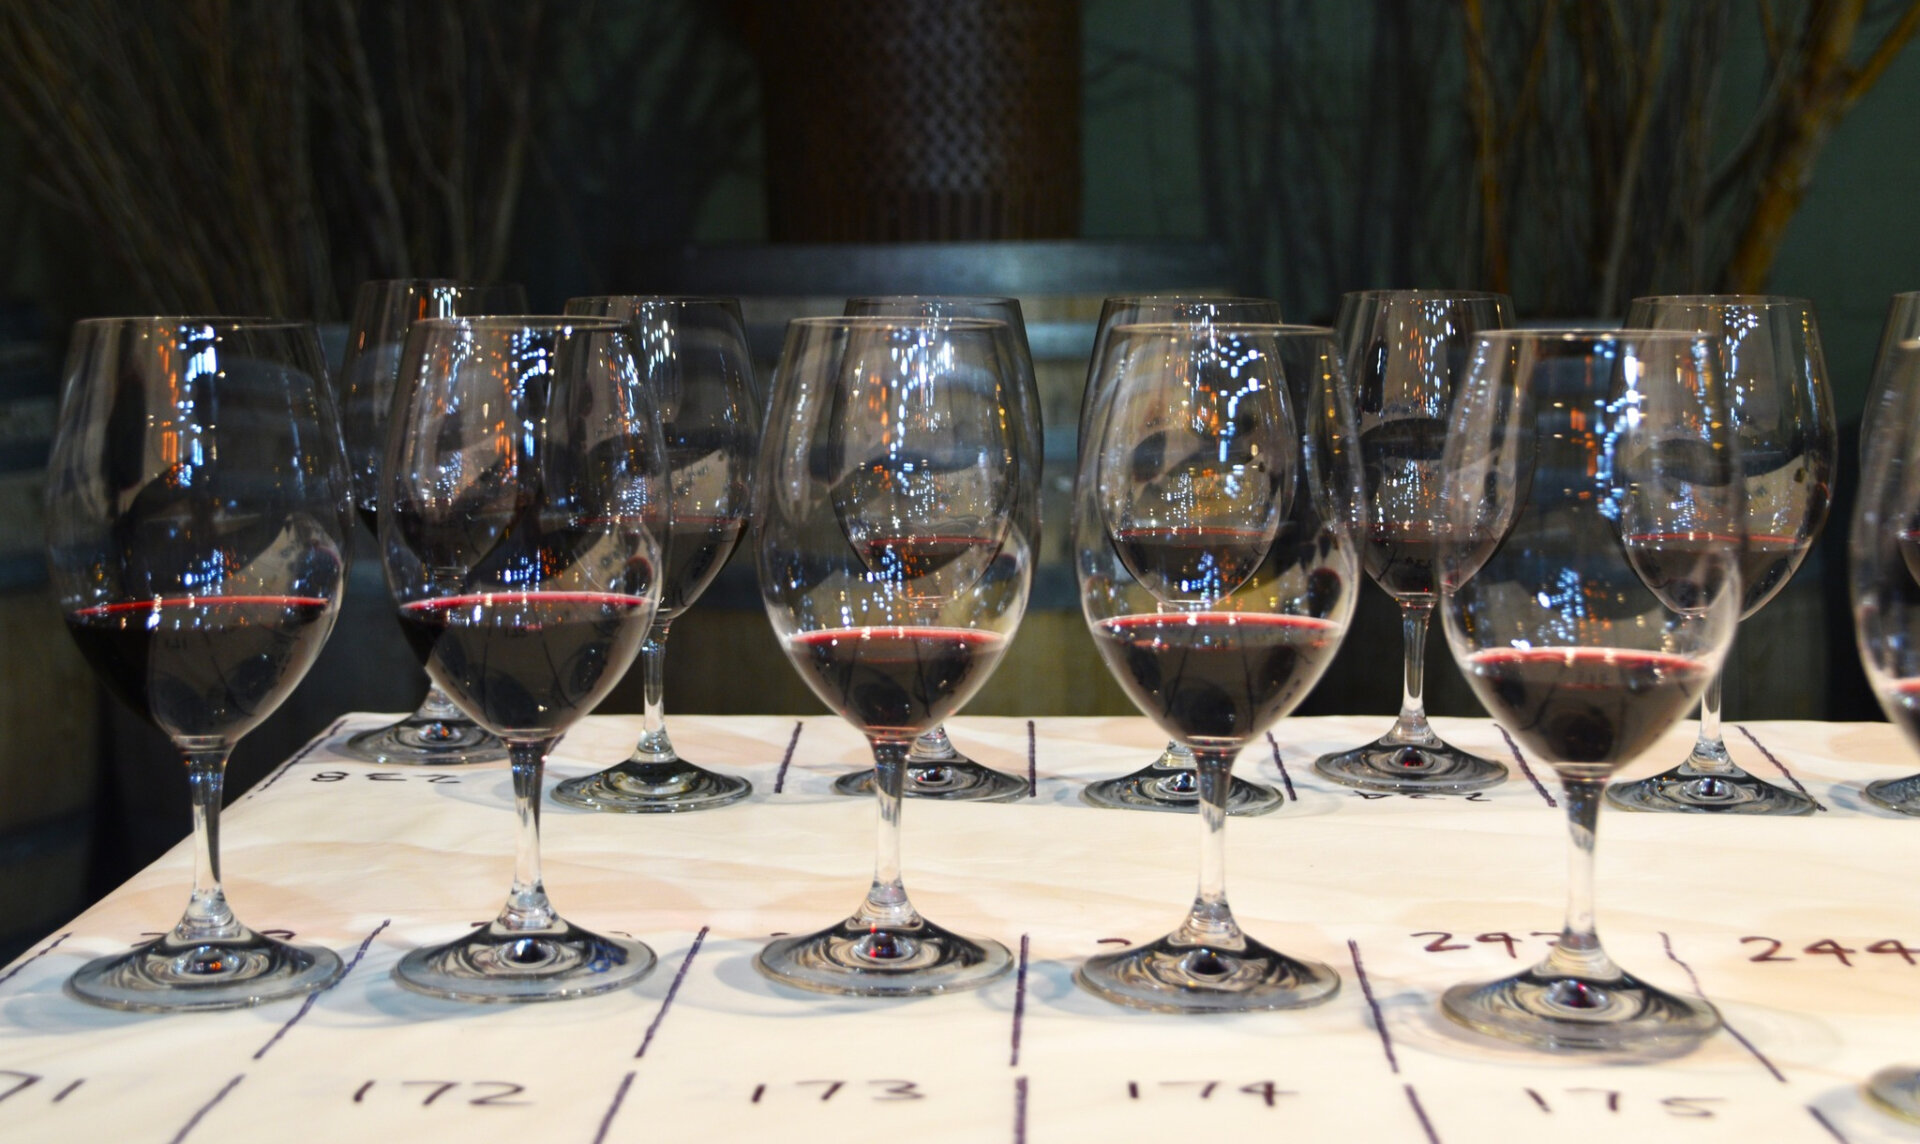 Two rows of wine glasses with dark red wine, along a table with markings numbering each class.